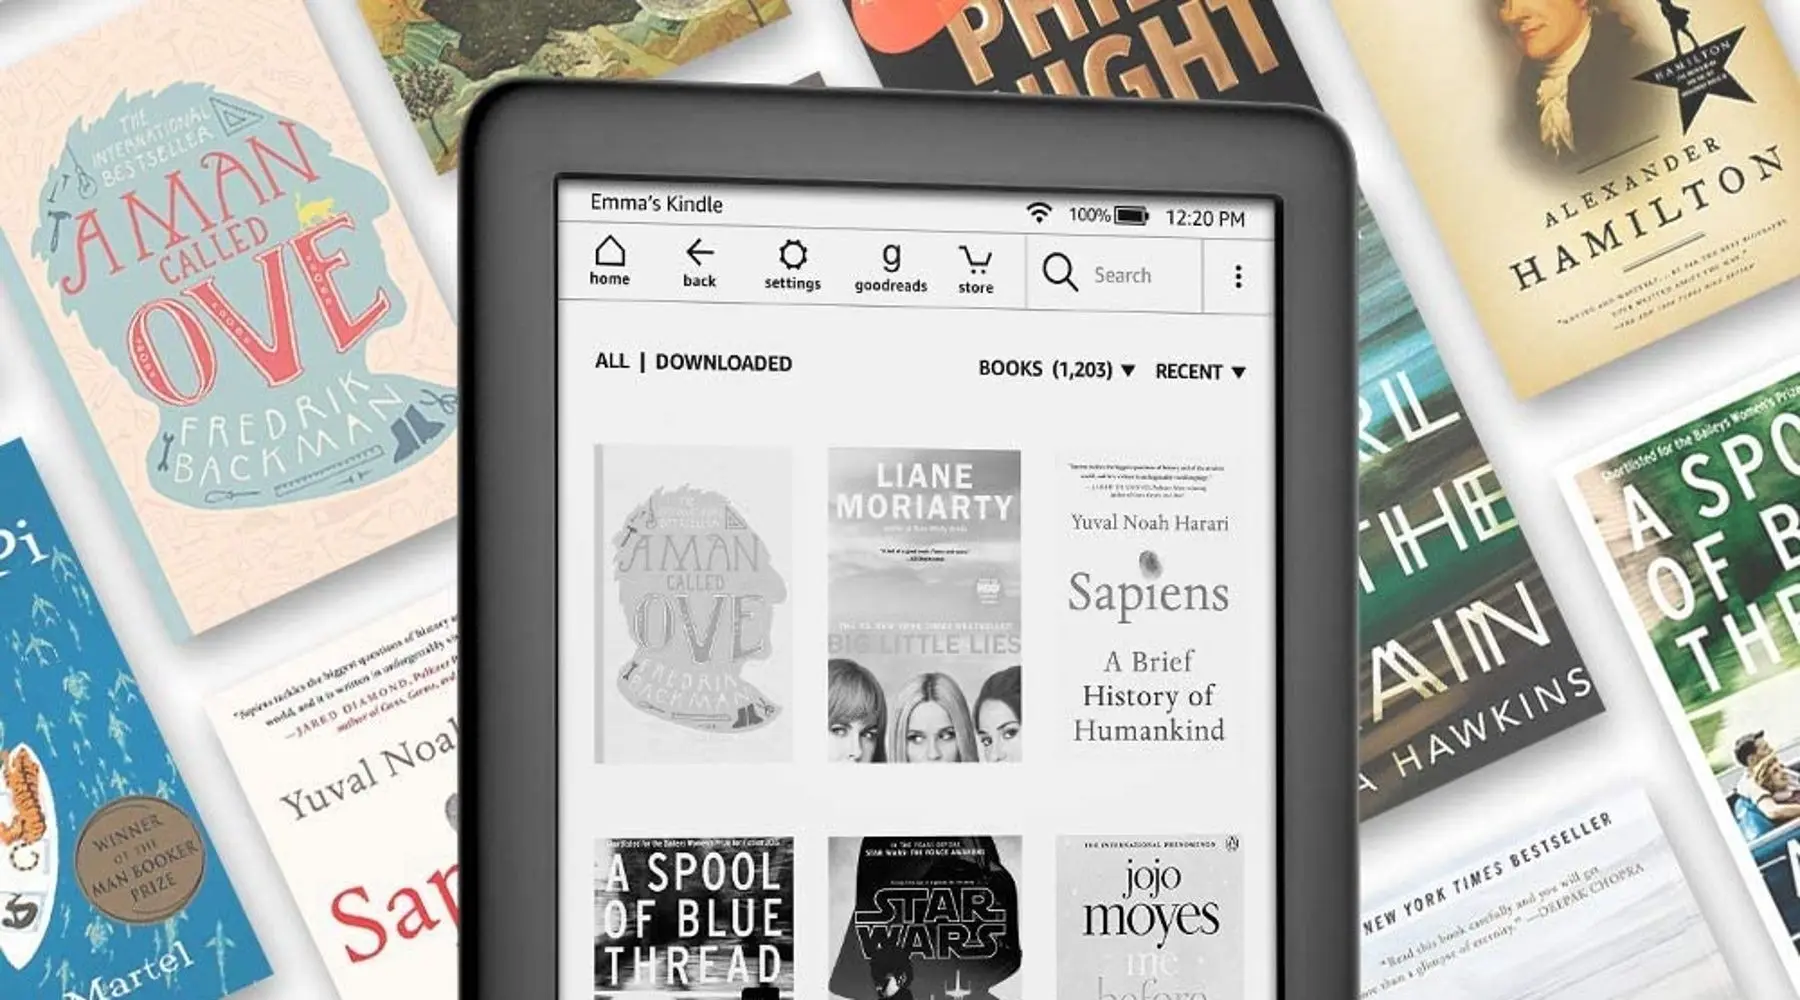 How Much Does Kindle Unlimited Cost, and Is It Worth It?